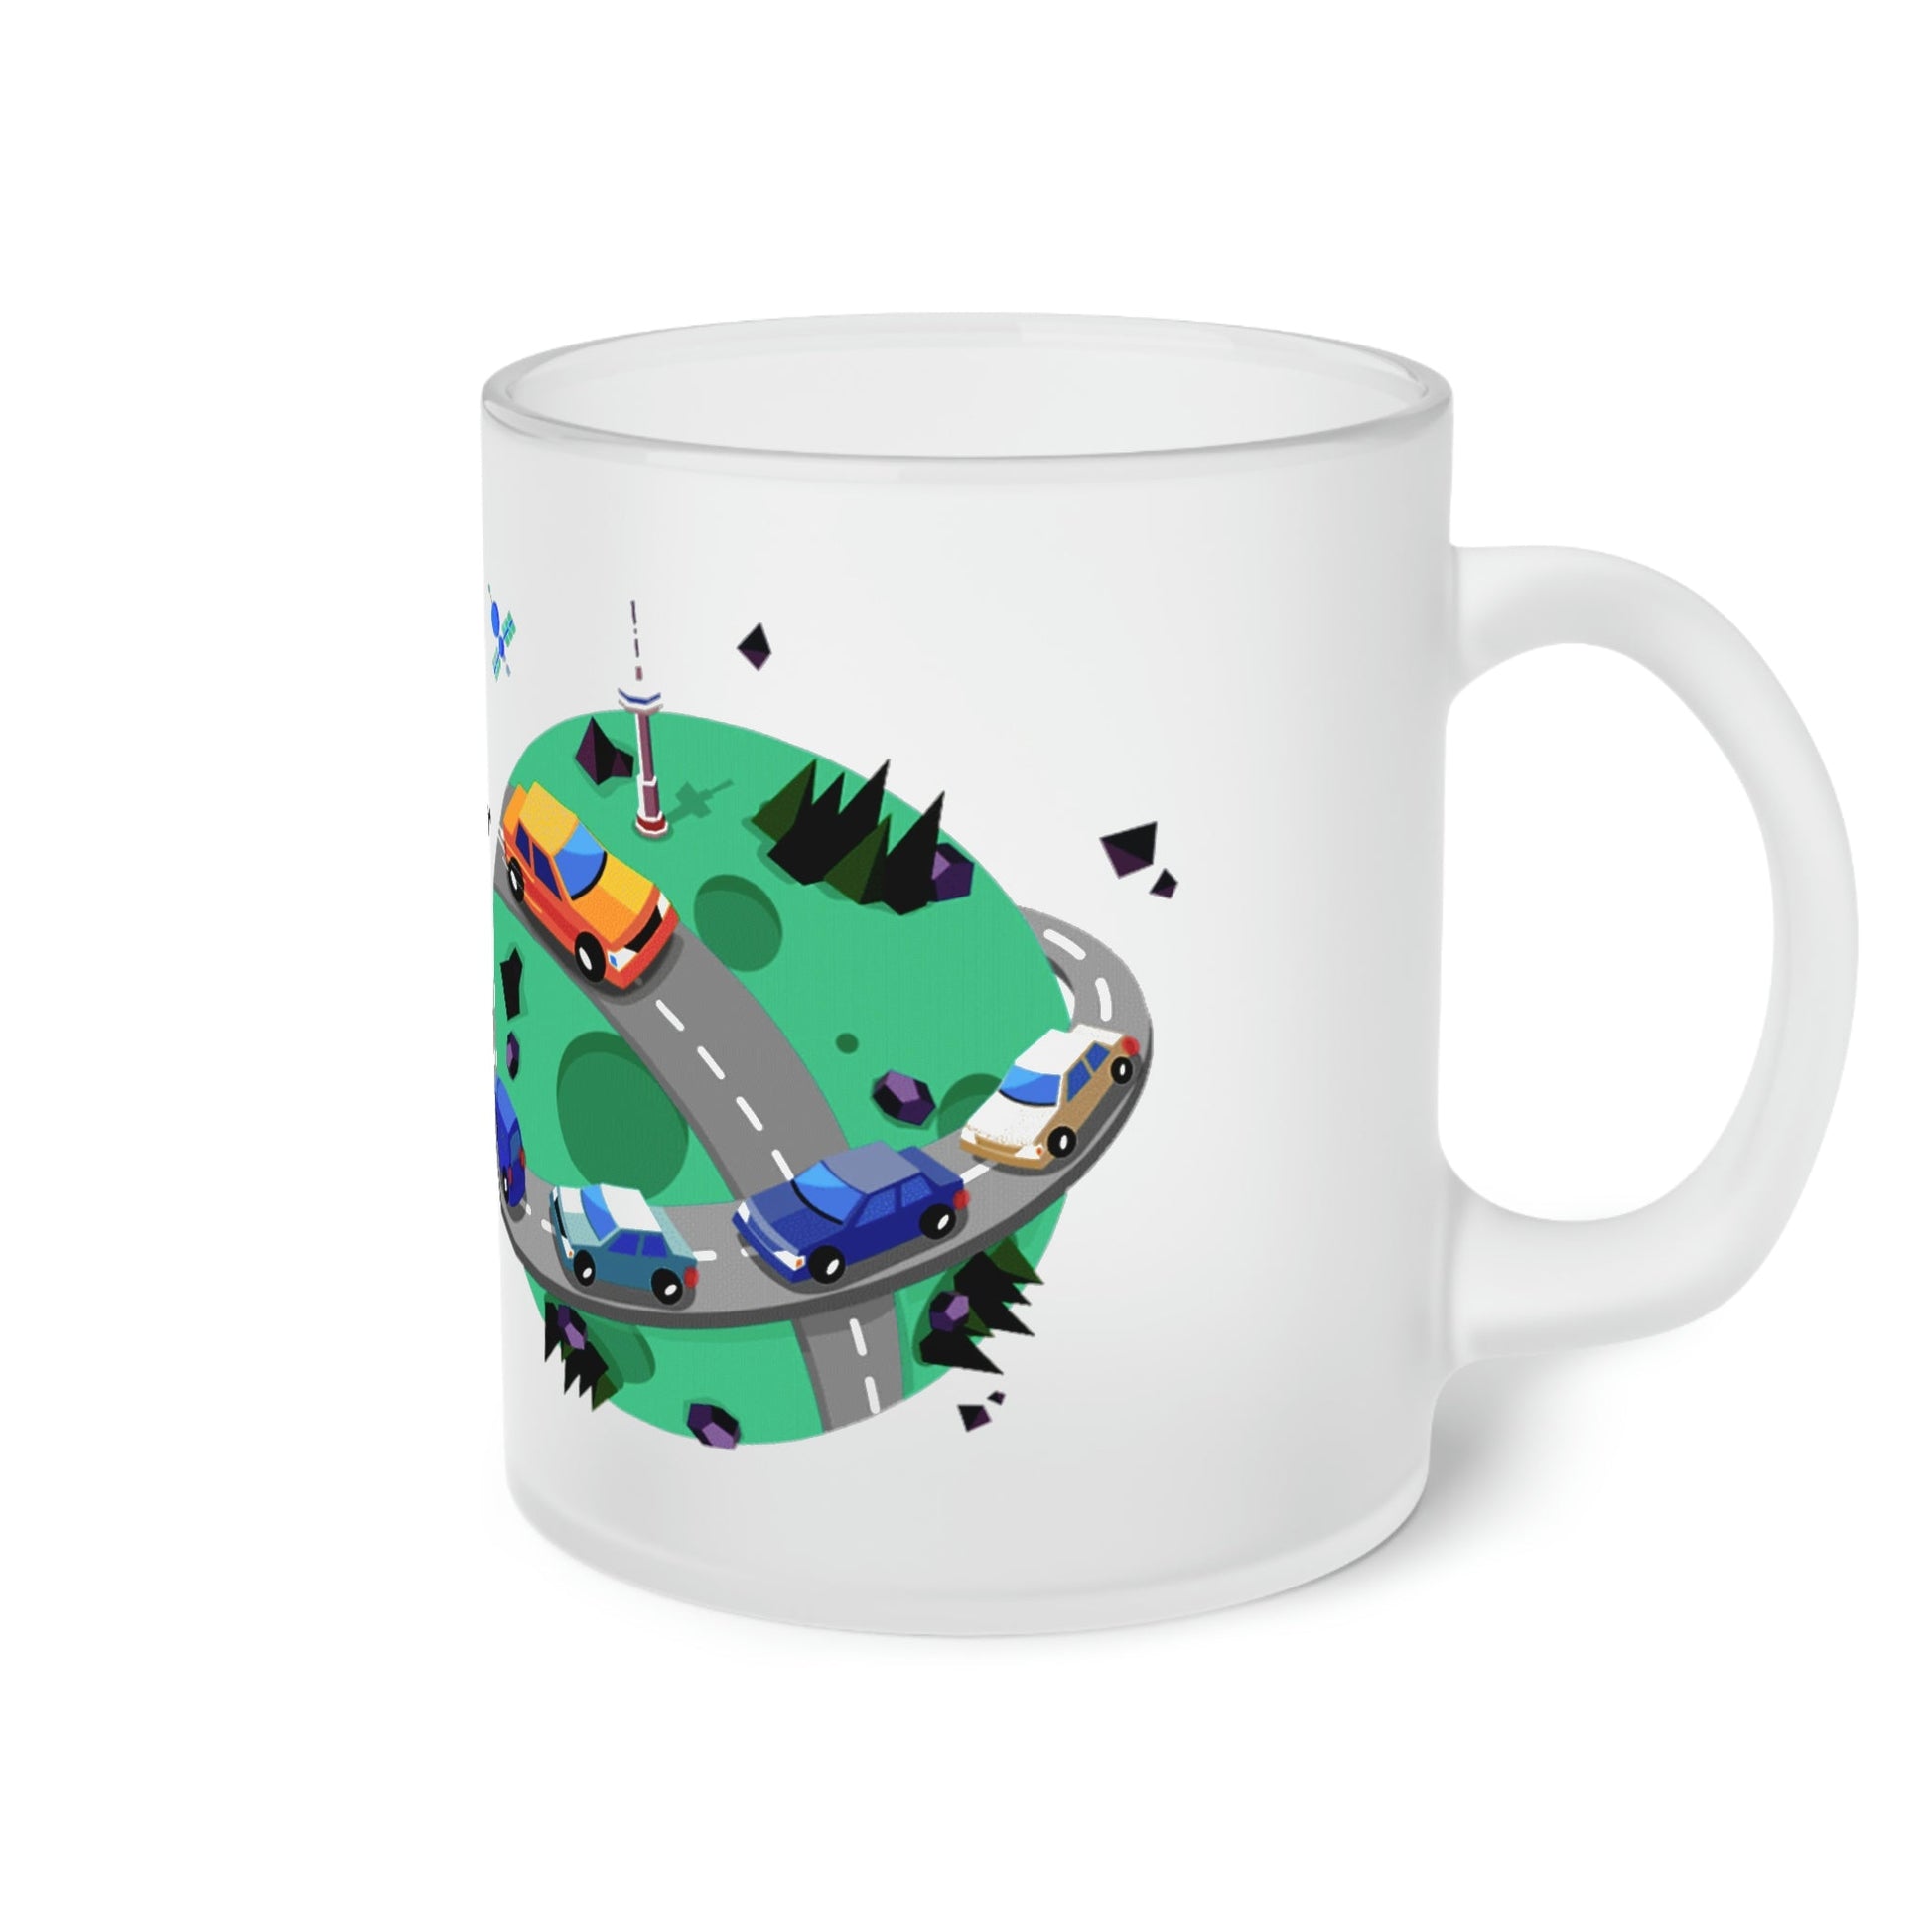 Designed by a Teen in USA: Frosted Glass Mug (Earth Themed) 11 oz. Try more Mugs, Tumblers, Flasks and Drinkware Accessories. Available only at ThirstFull.com. Prices start from $5.99 USD.